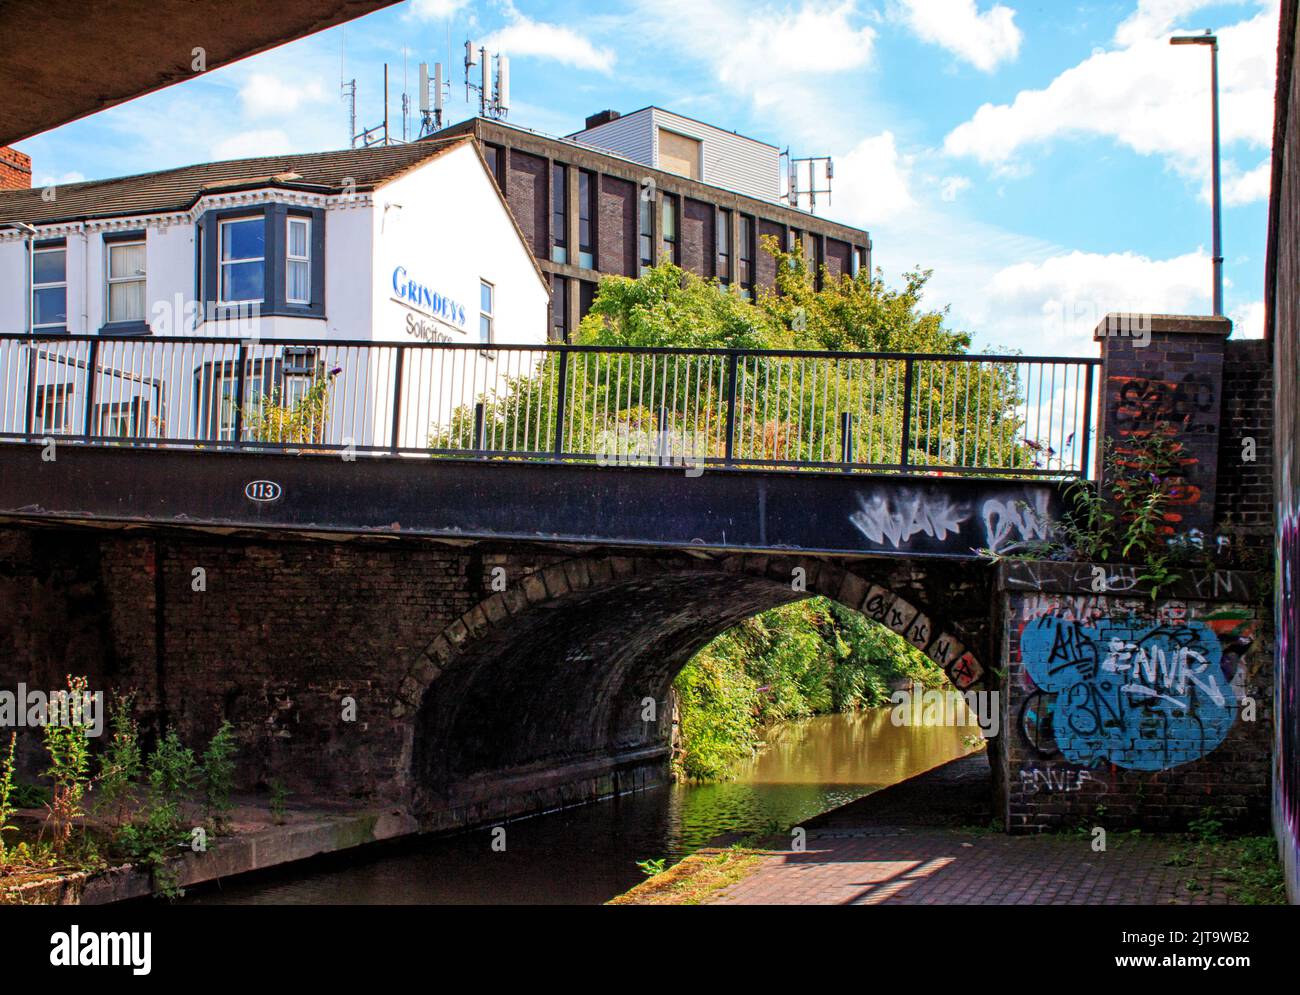 Urban architecture viewed from a sloping canal bridge, carrying the road over the Trent and Mersey Canal, o the junction with the Newcastle Canal Stock Photo